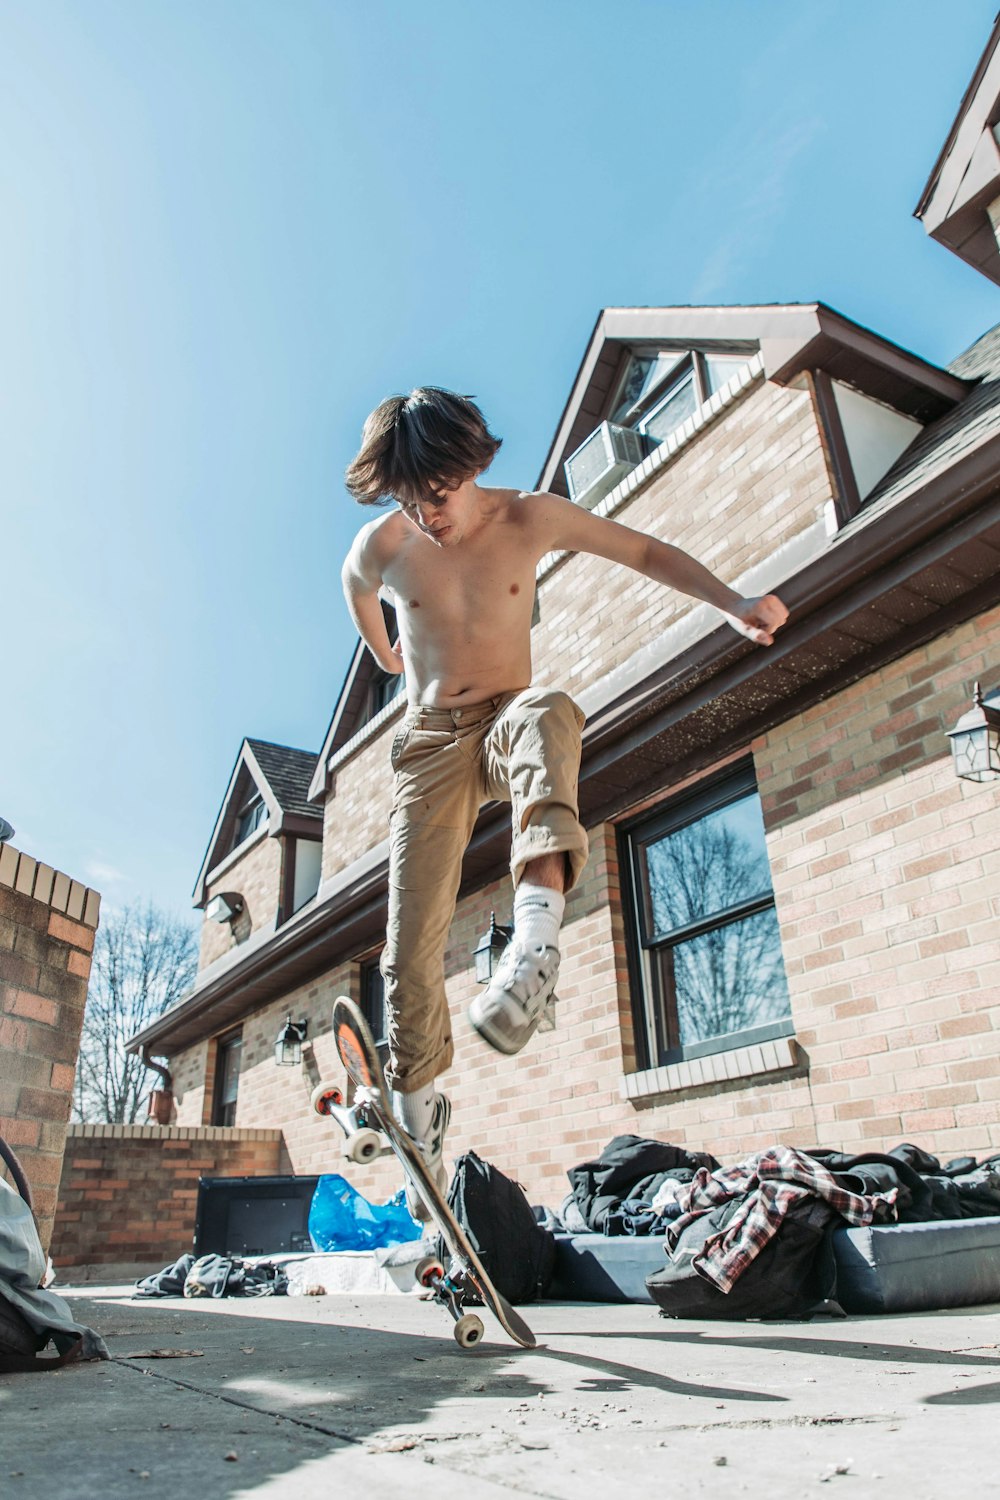 a shirtless skateboarder doing a trick in front of a house